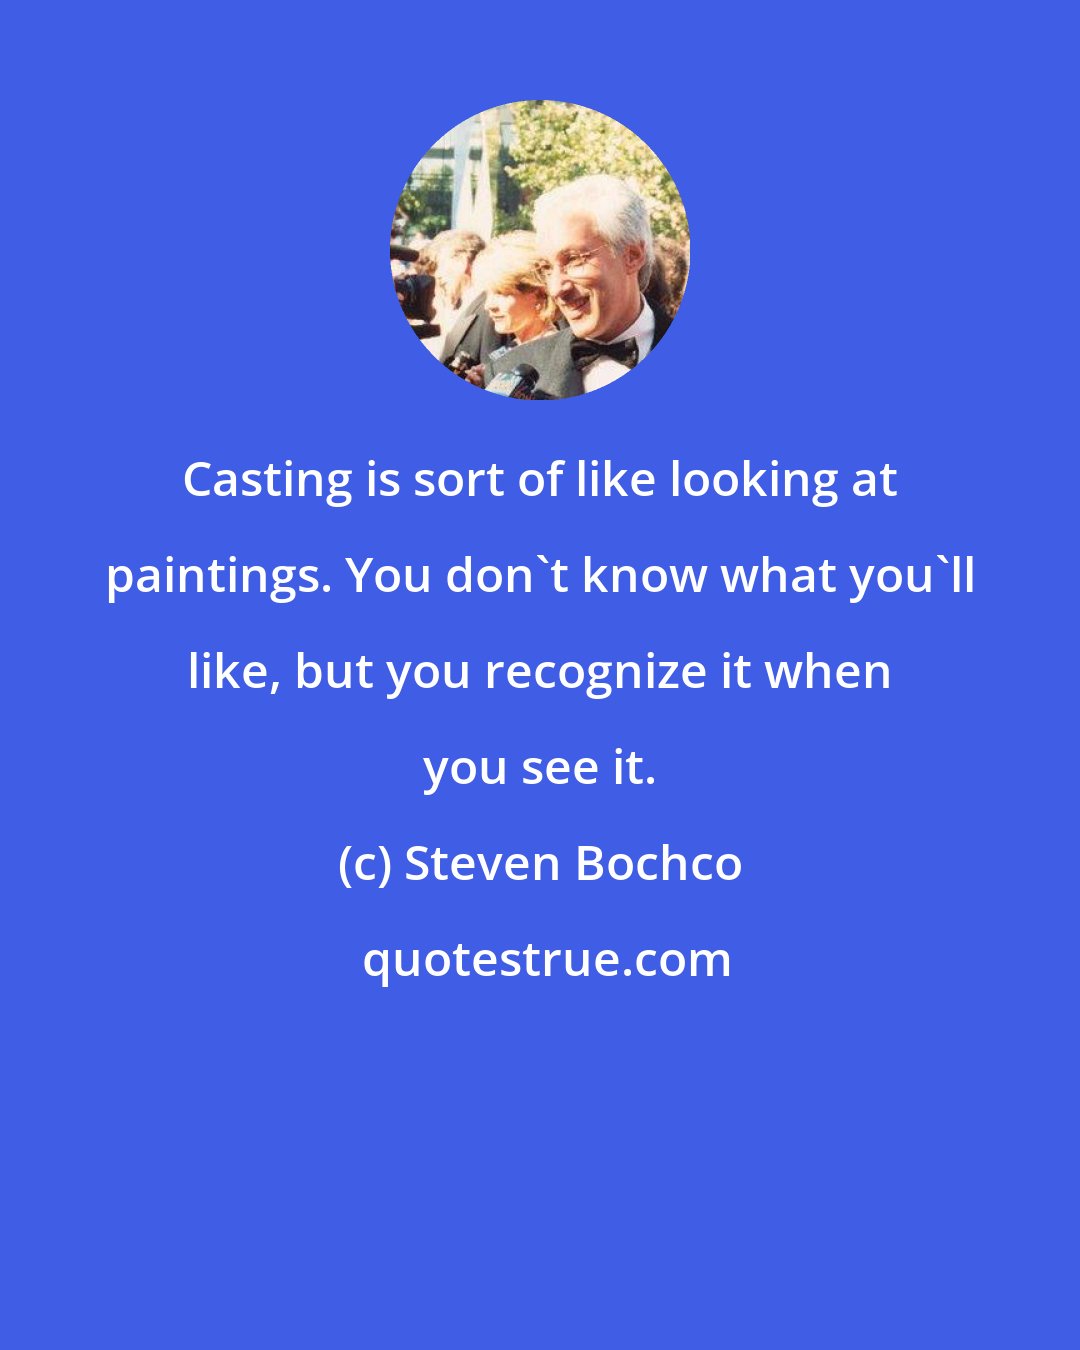 Steven Bochco: Casting is sort of like looking at paintings. You don't know what you'll like, but you recognize it when you see it.